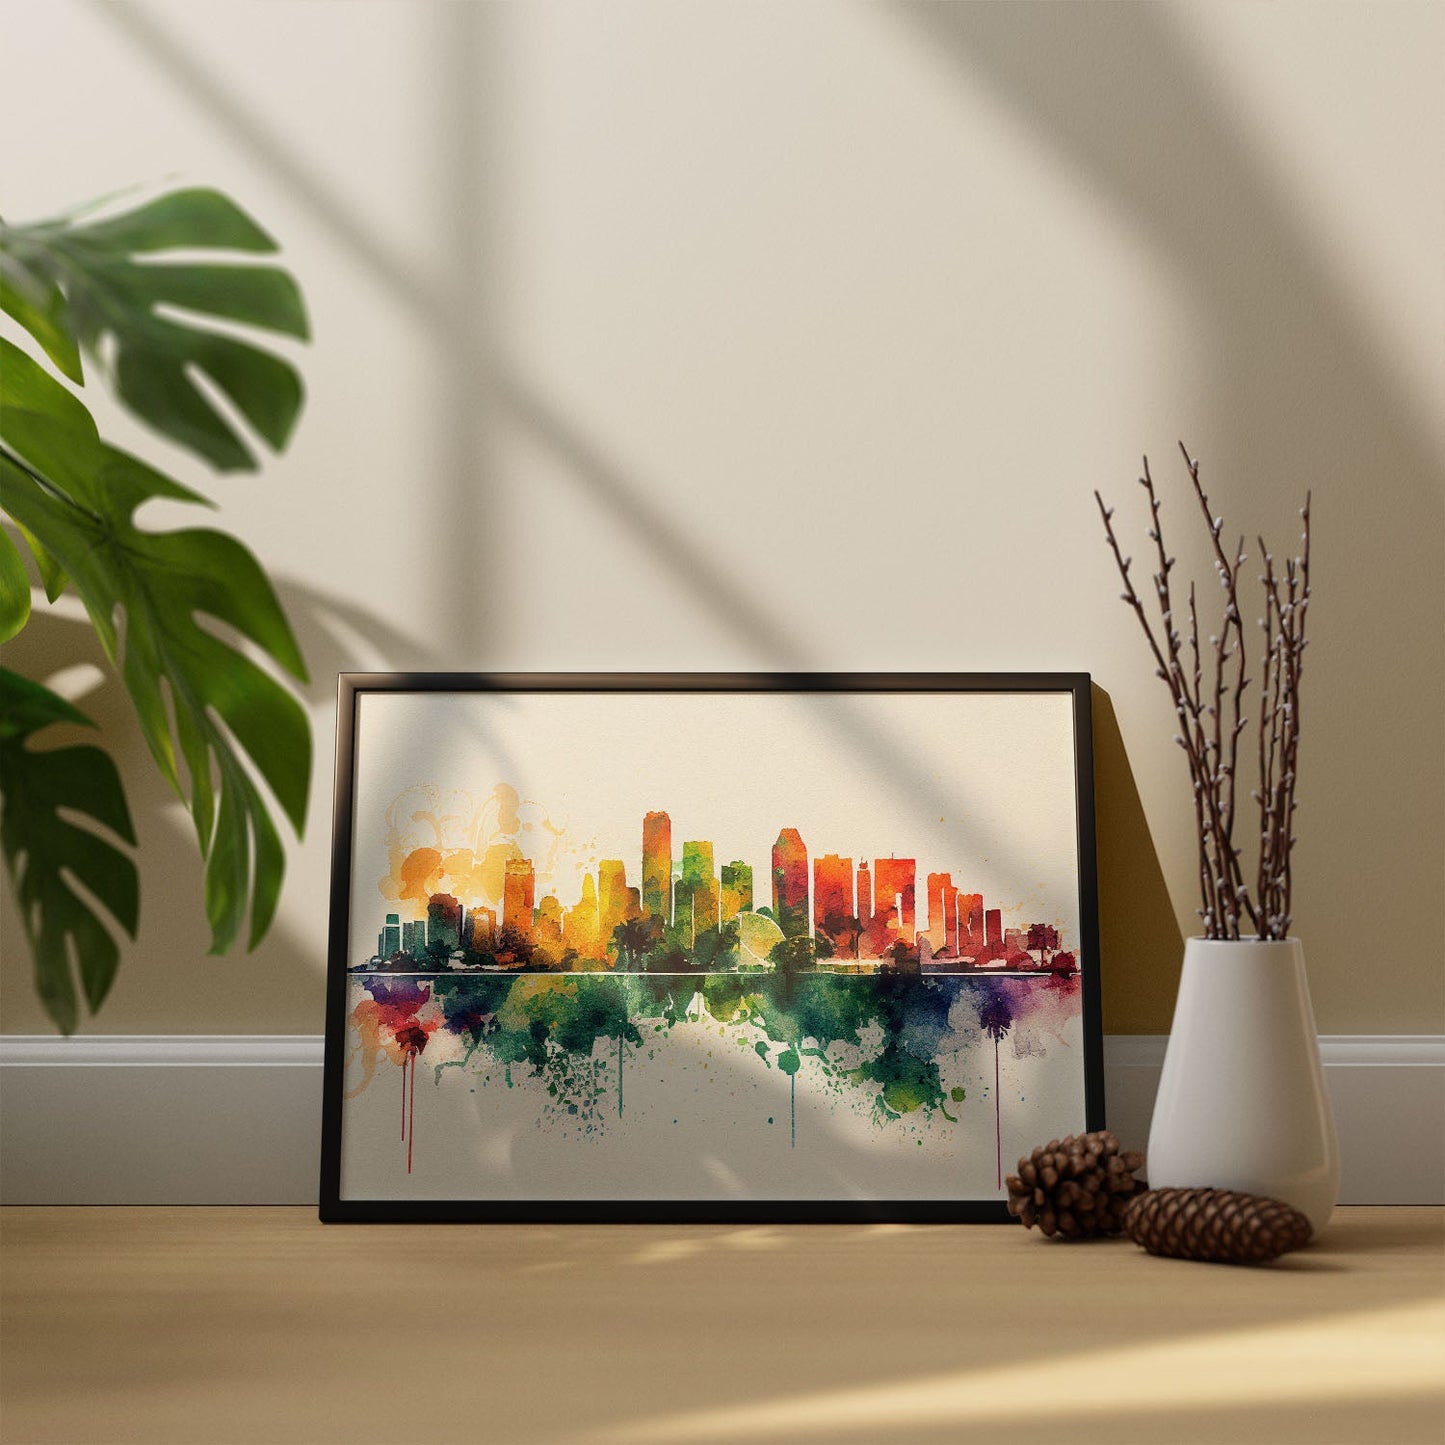 Nacnic watercolor of a skyline of the city of Miami_1. Aesthetic Wall Art Prints for Bedroom or Living Room Design.-Artwork-Nacnic-A4-Sin Marco-Nacnic Estudio SL